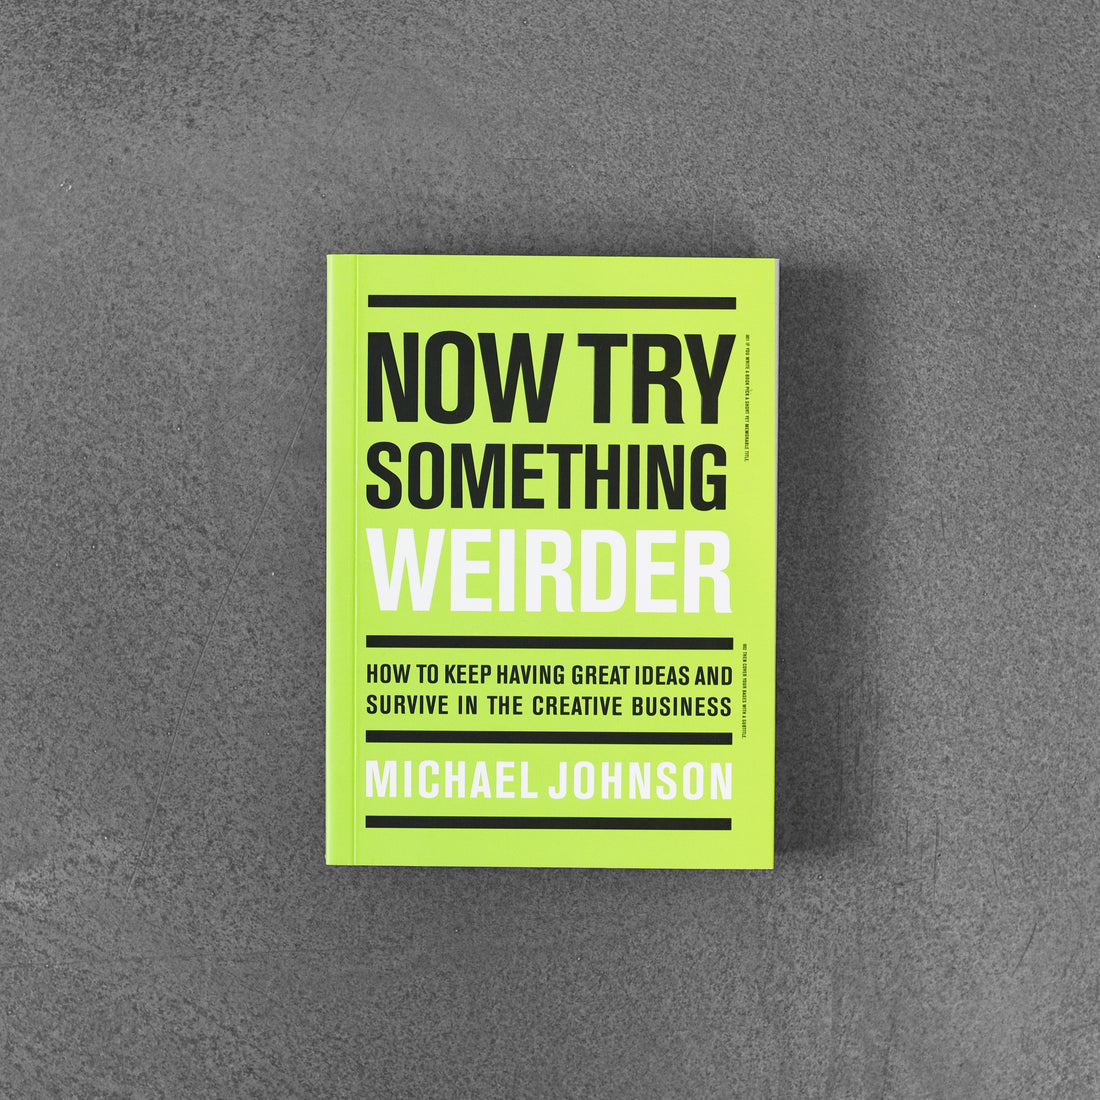 Now Try Something Weirder - Michael Johnson